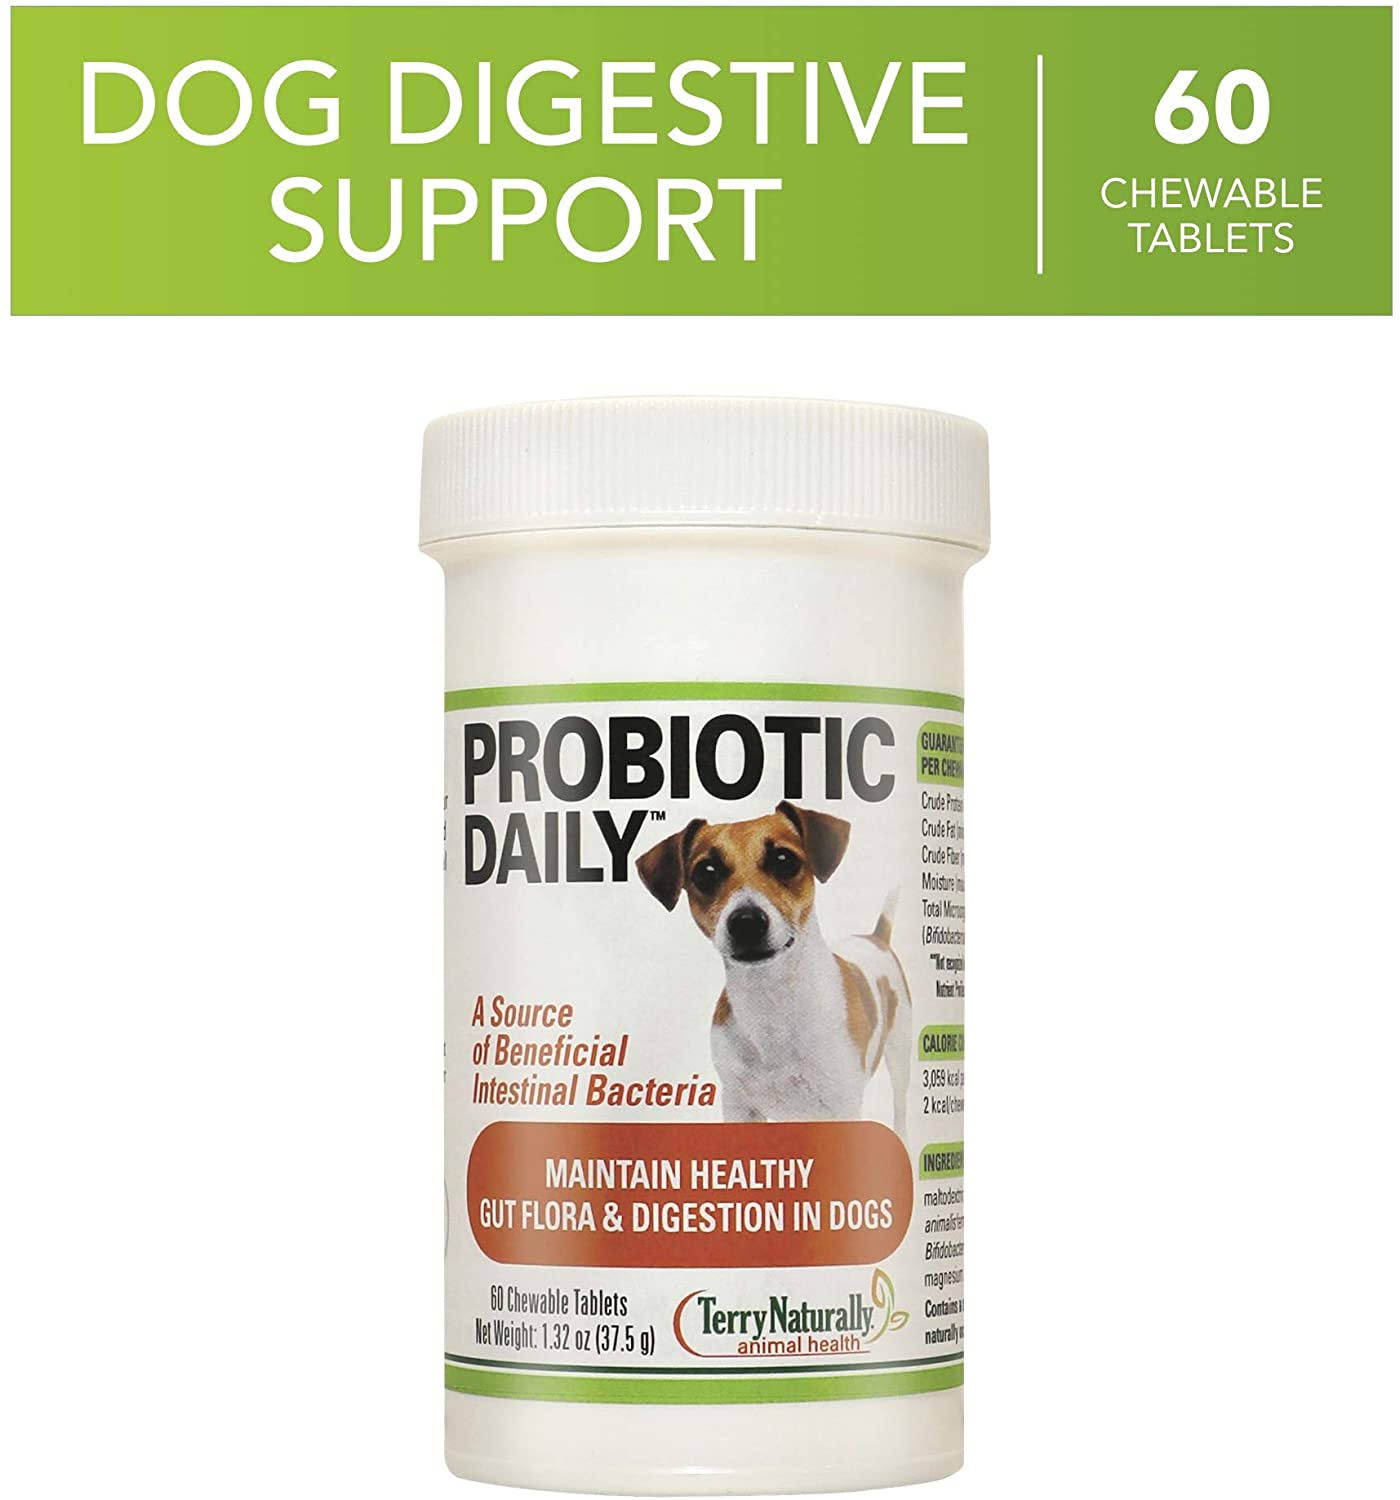 Terry Naturally Animal Health Probiotic Daily - 60 Chewable Tablets -